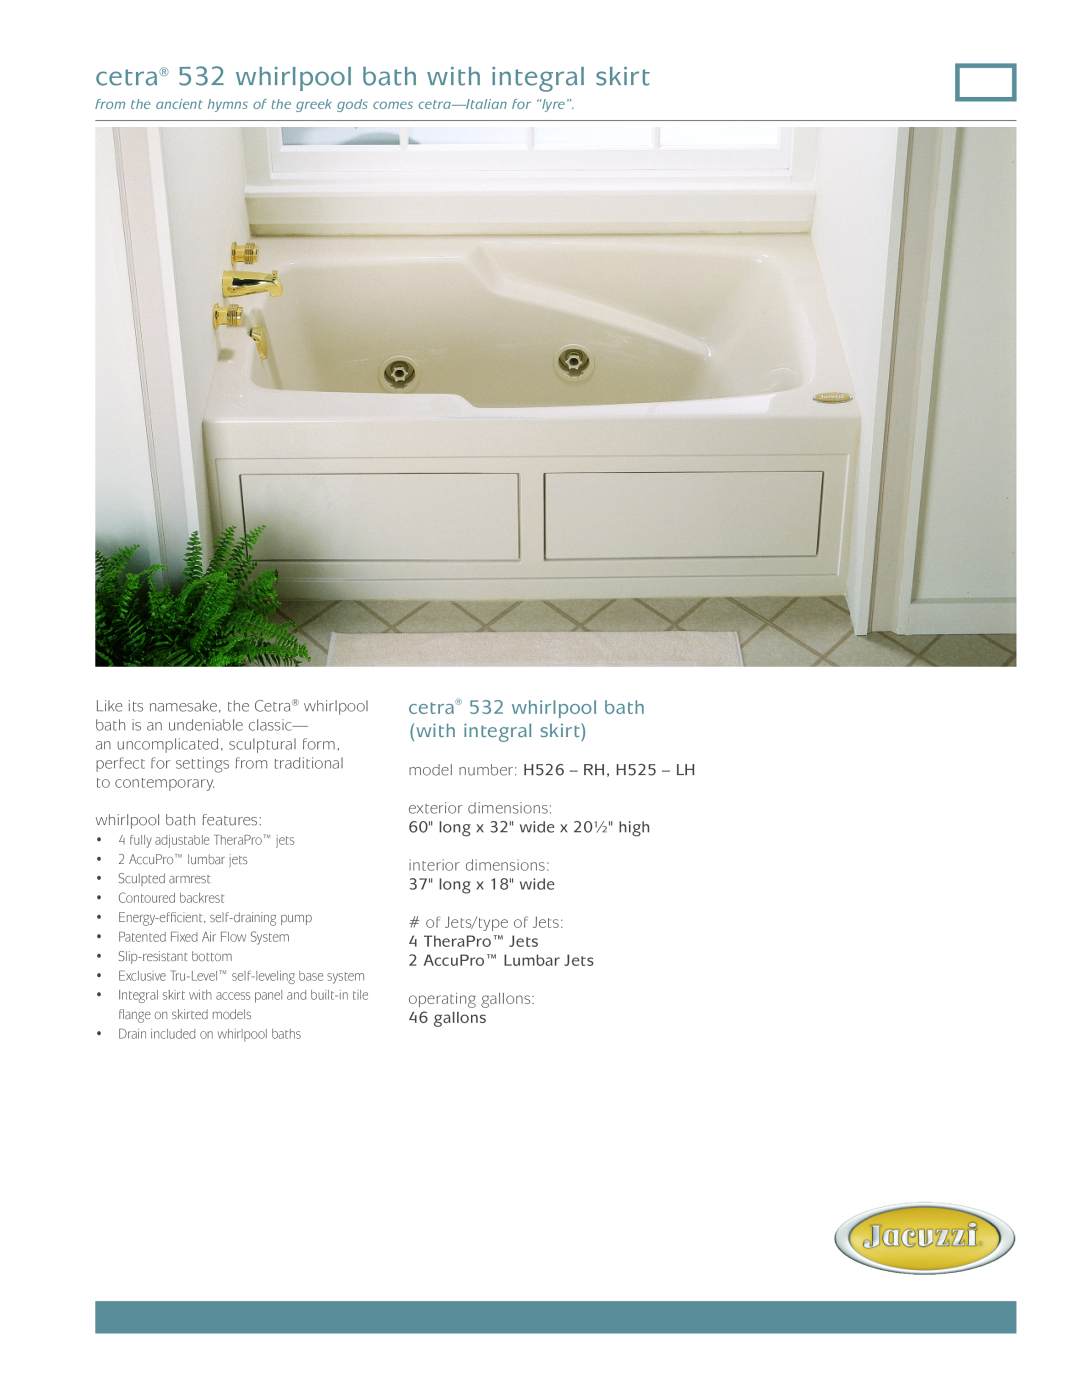 Jacuzzi FR25 dimensions cetra 532 whirlpool bath with integral skirt 